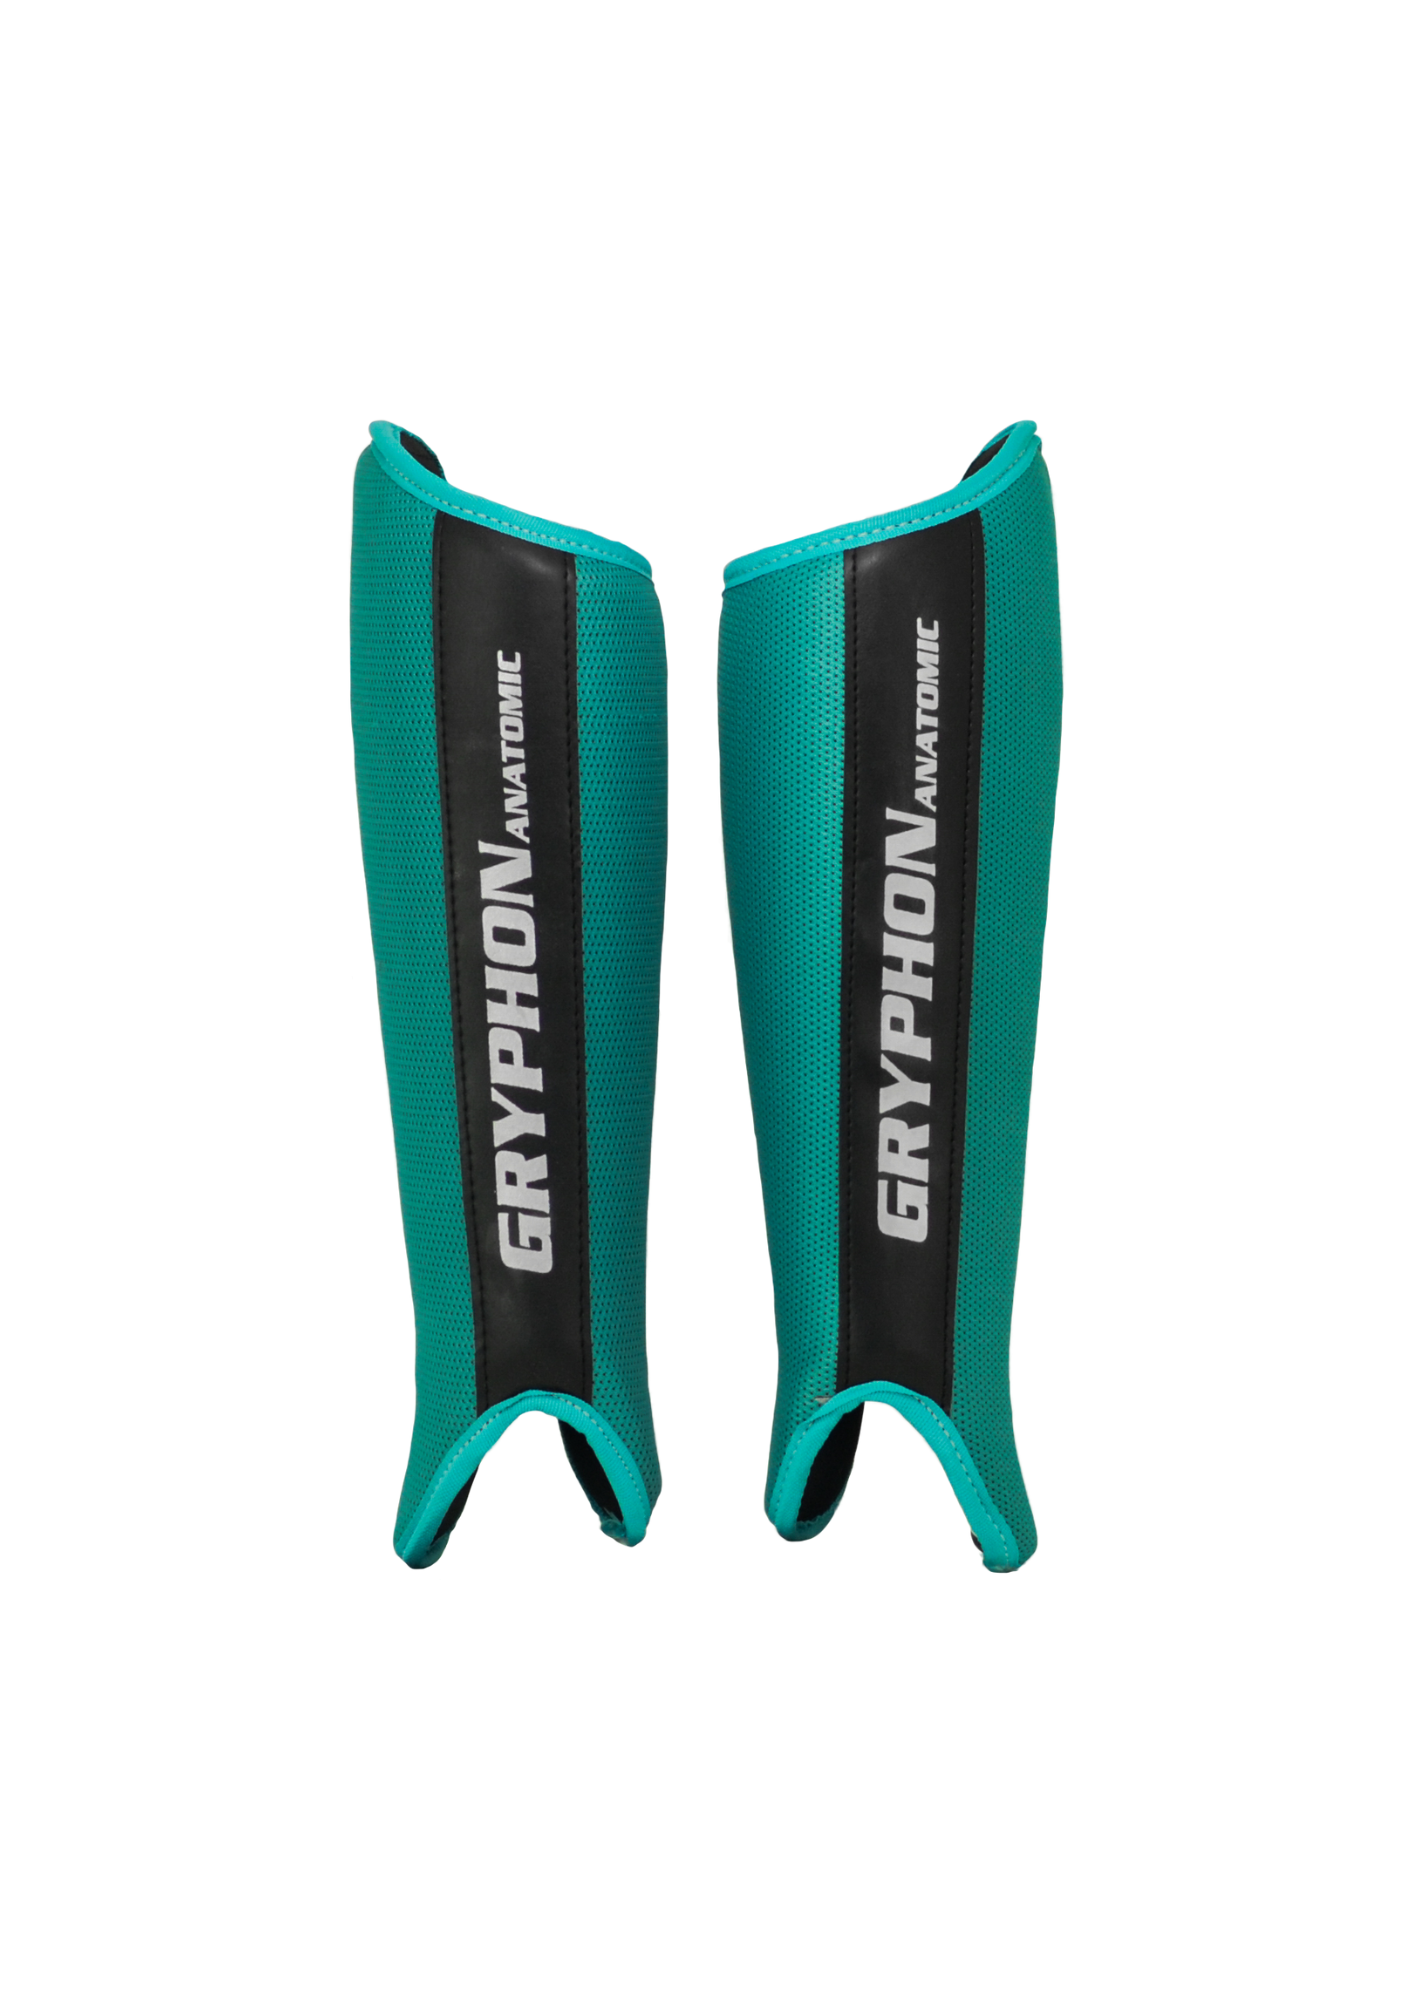 CANILLERAS GRYPHON ANATOMIC TEAL